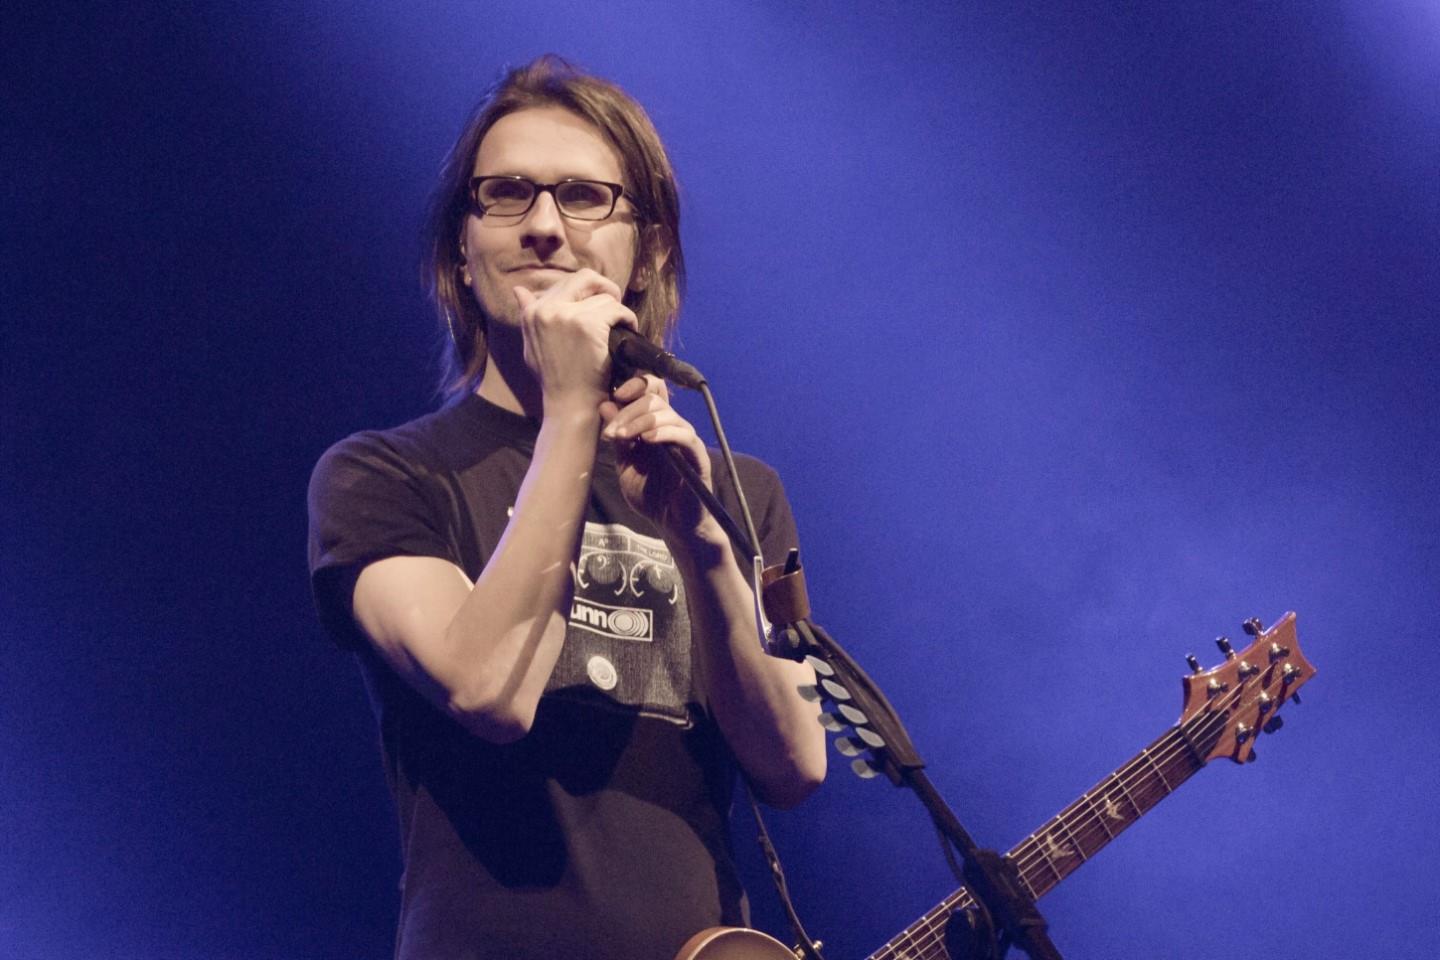 Steven Wilson Extends “To The Bone” Tour 2018 Dates – Tickets on Sale